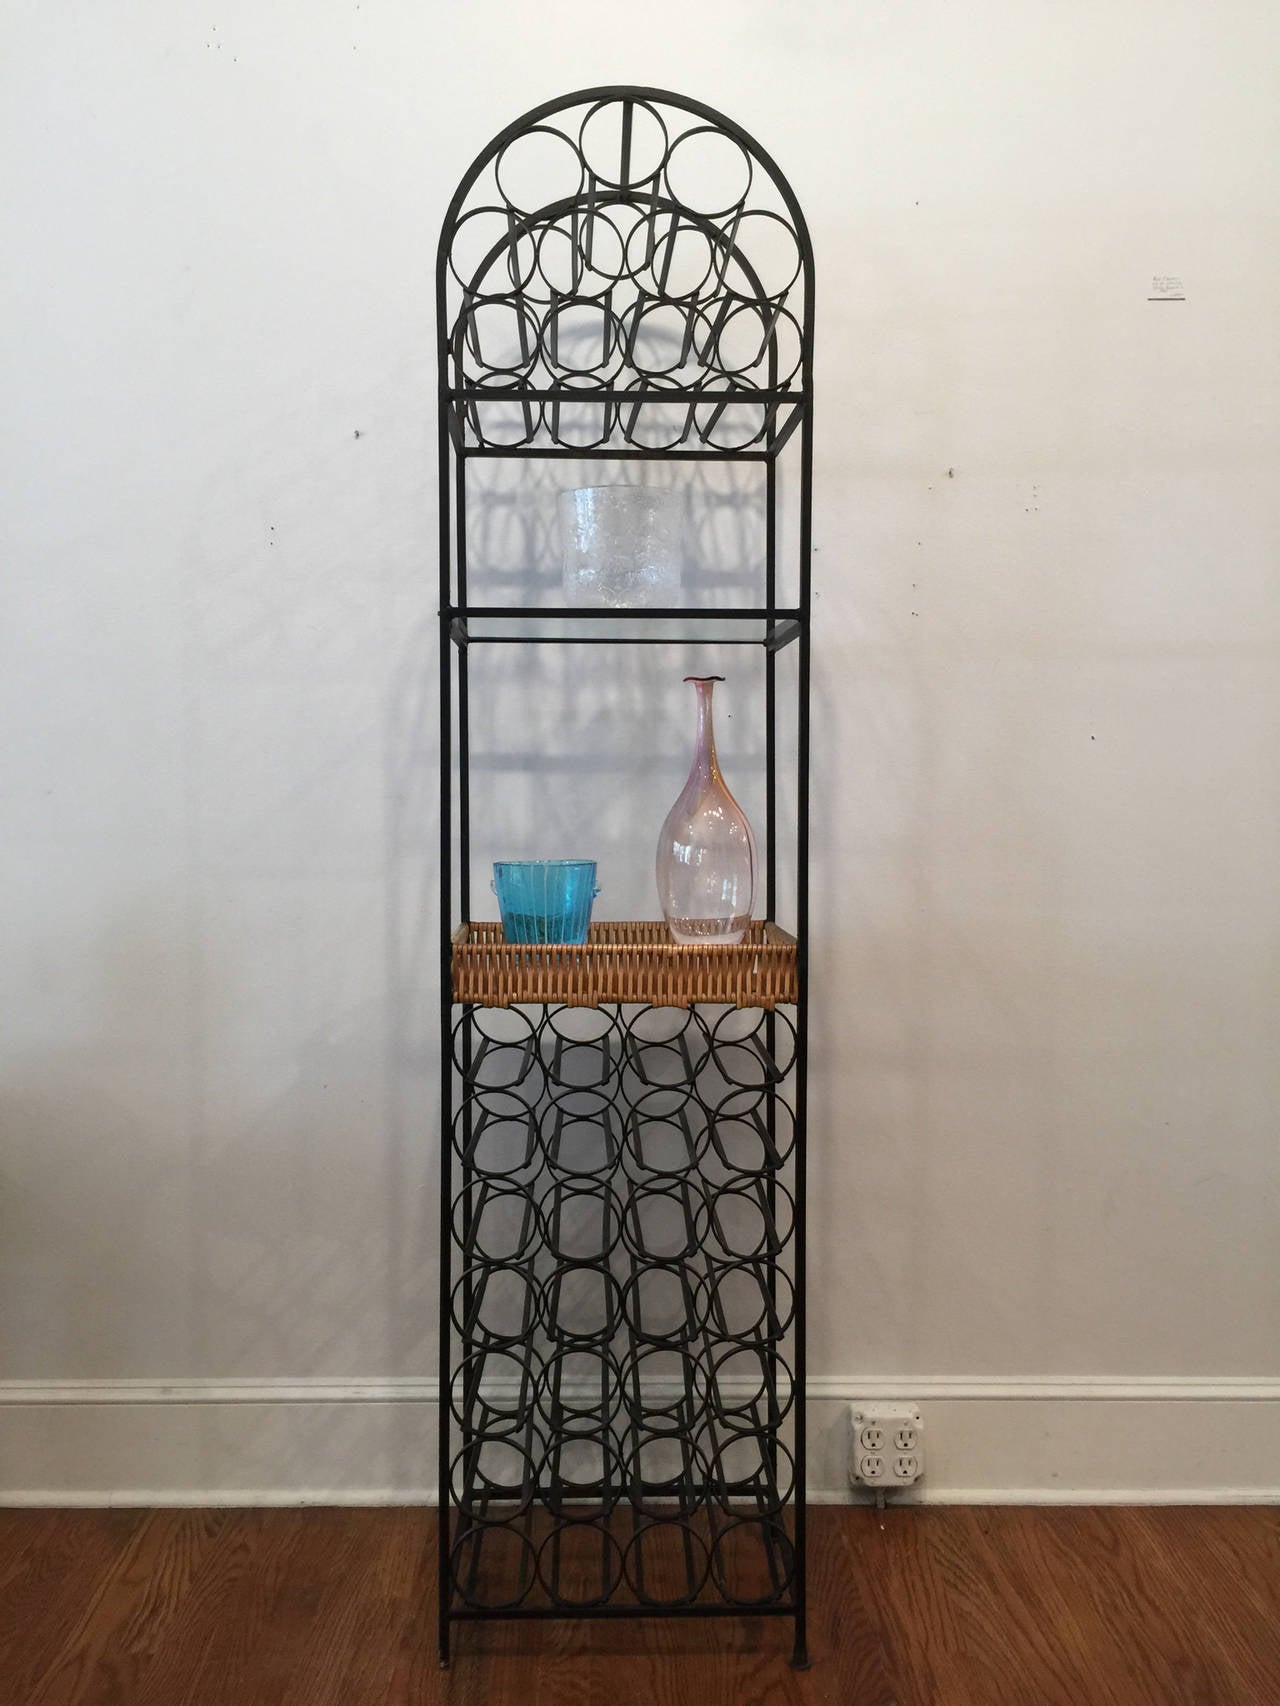 Tall iron wine rack, with cane basket and glass shelf, designed by Arthur Umanoff for Howard Shaver. Designed in the late 1960s, very functional wine rack holds 39 bottles along with display and storage for glasses and other related objects.